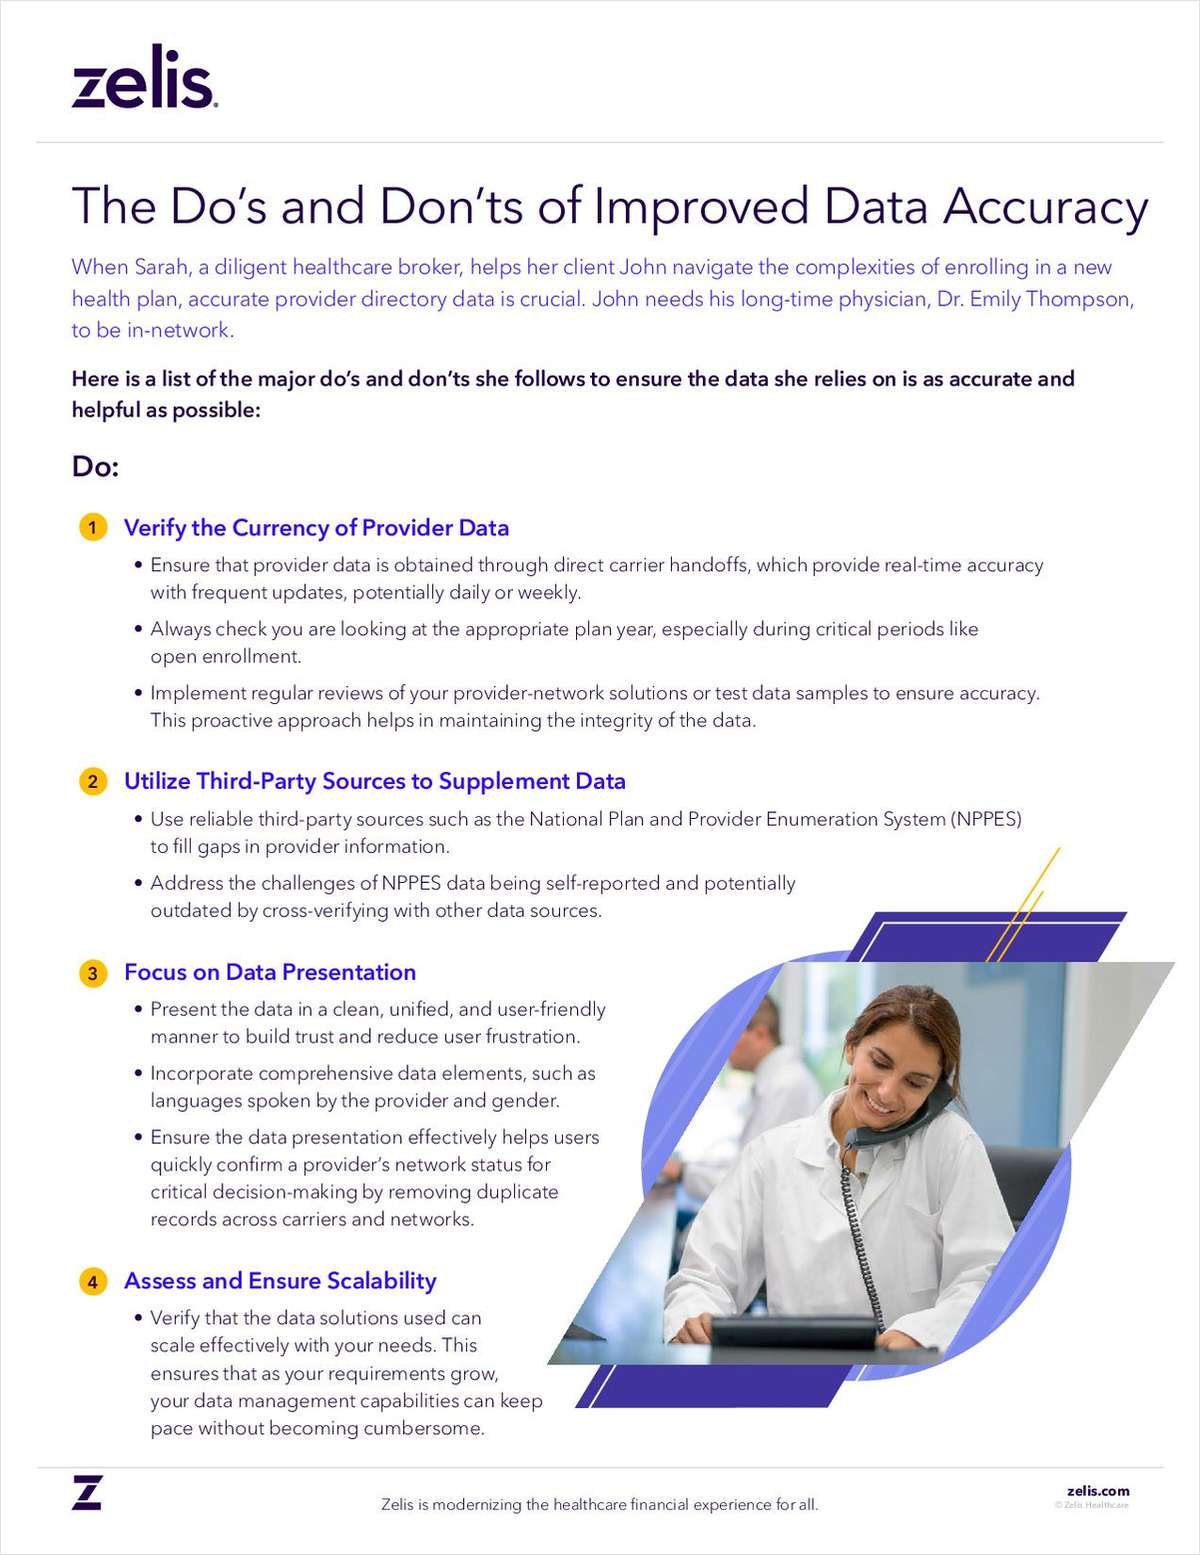 The Do's and Don'ts of Improved Data Accuracy link